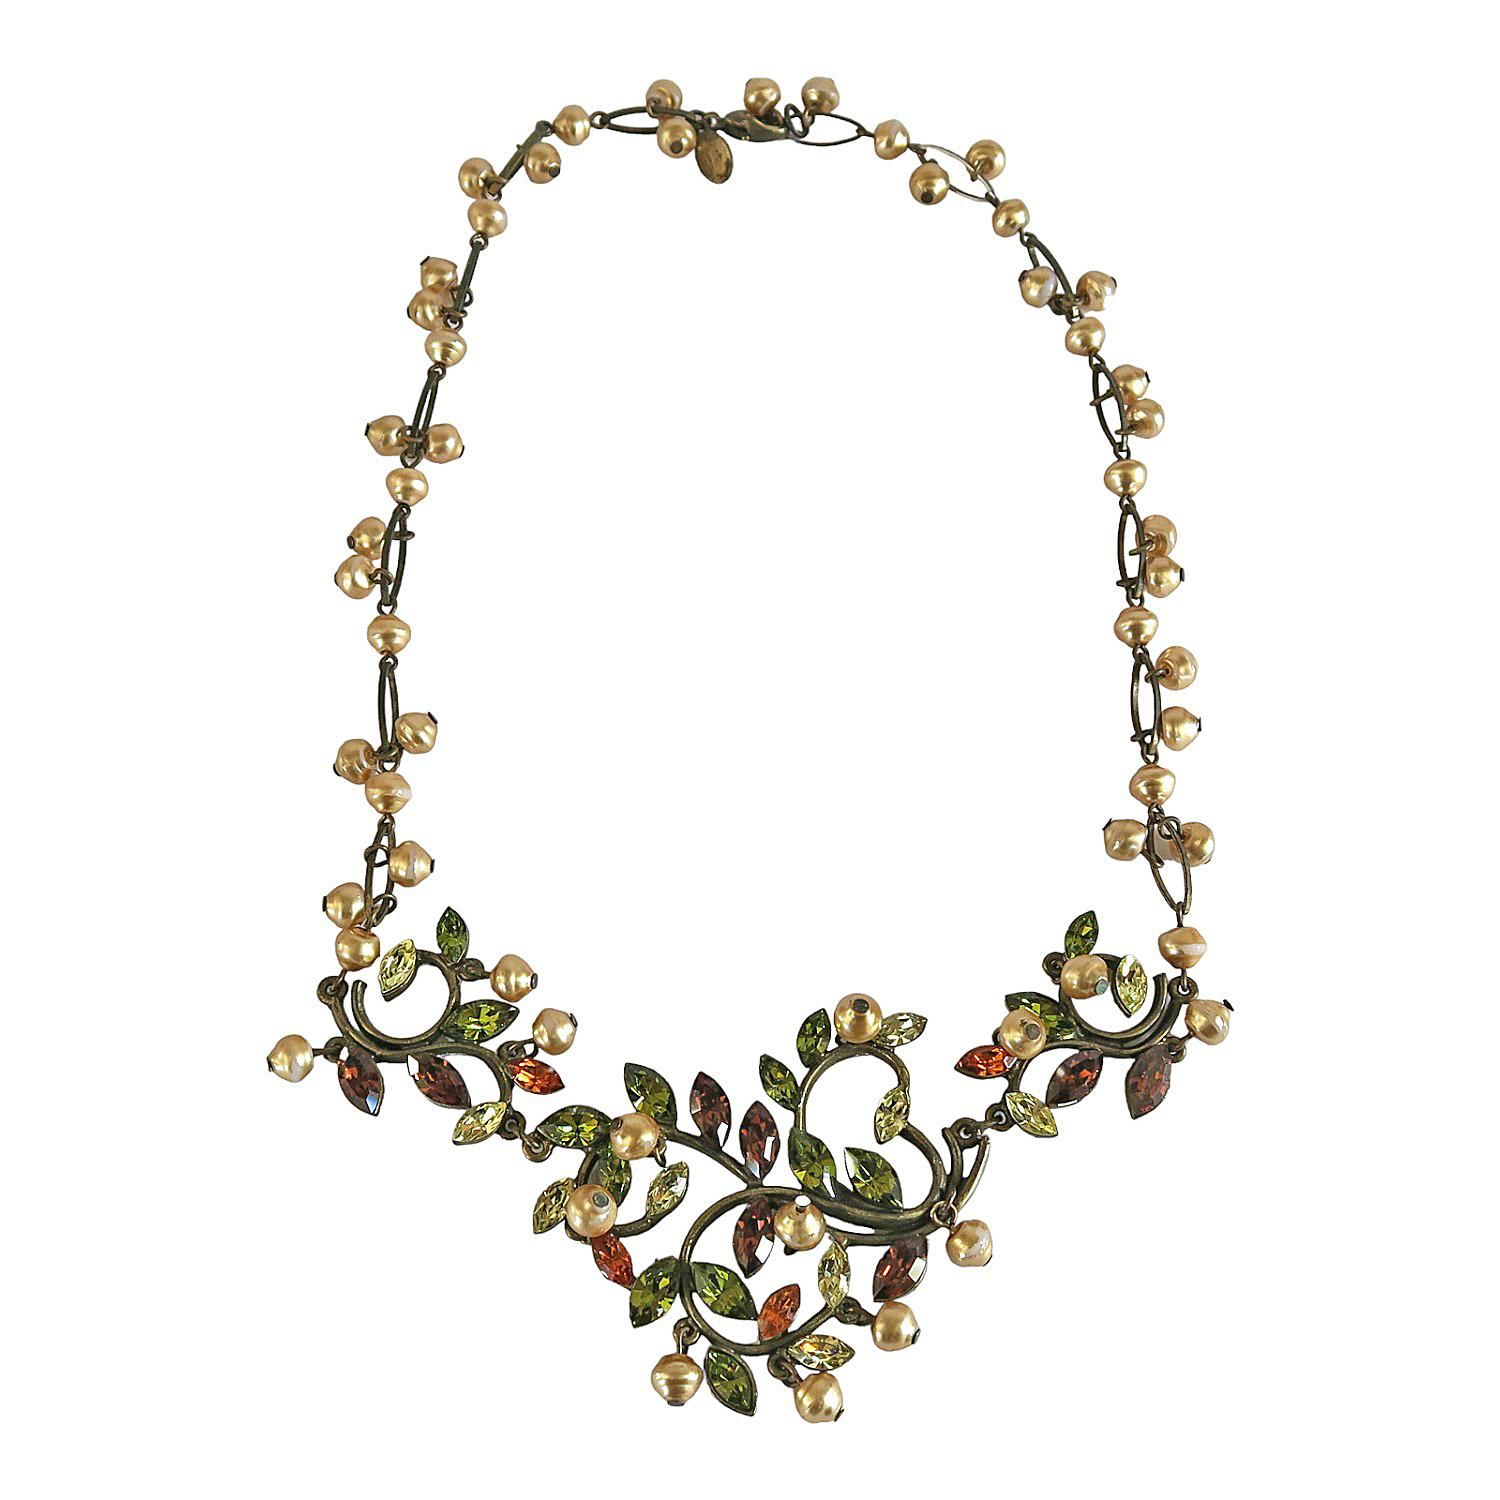 L'Eternité necklace: Gold plated baroque and couture costume jewelry